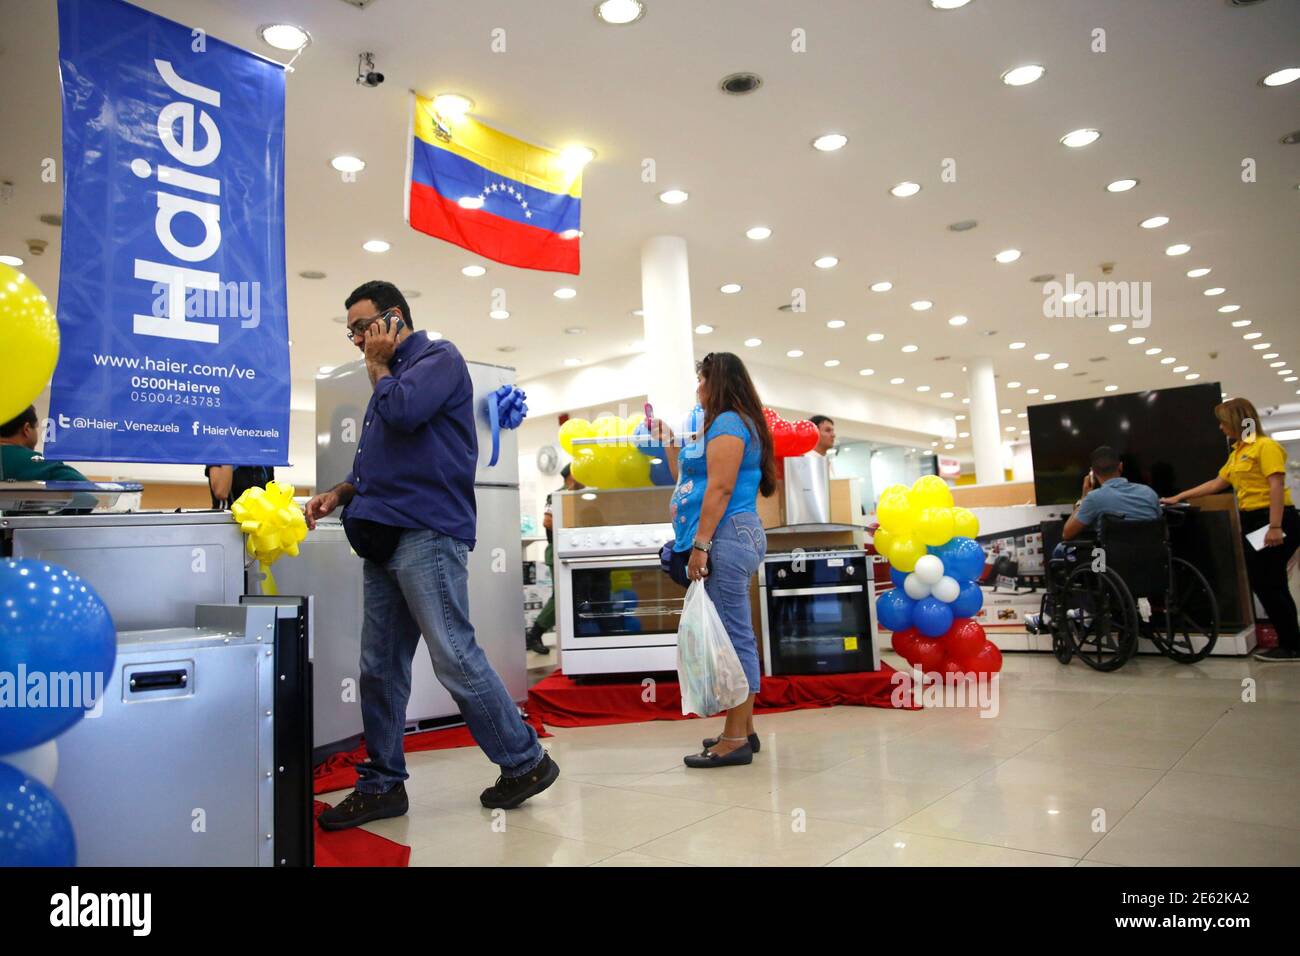 Shoppers shop for appliances at a store in Caracas 25, 2014. Thousands Venezuelans gathered on Tuesday at the gates of the popular chain appliance stores trying to buy